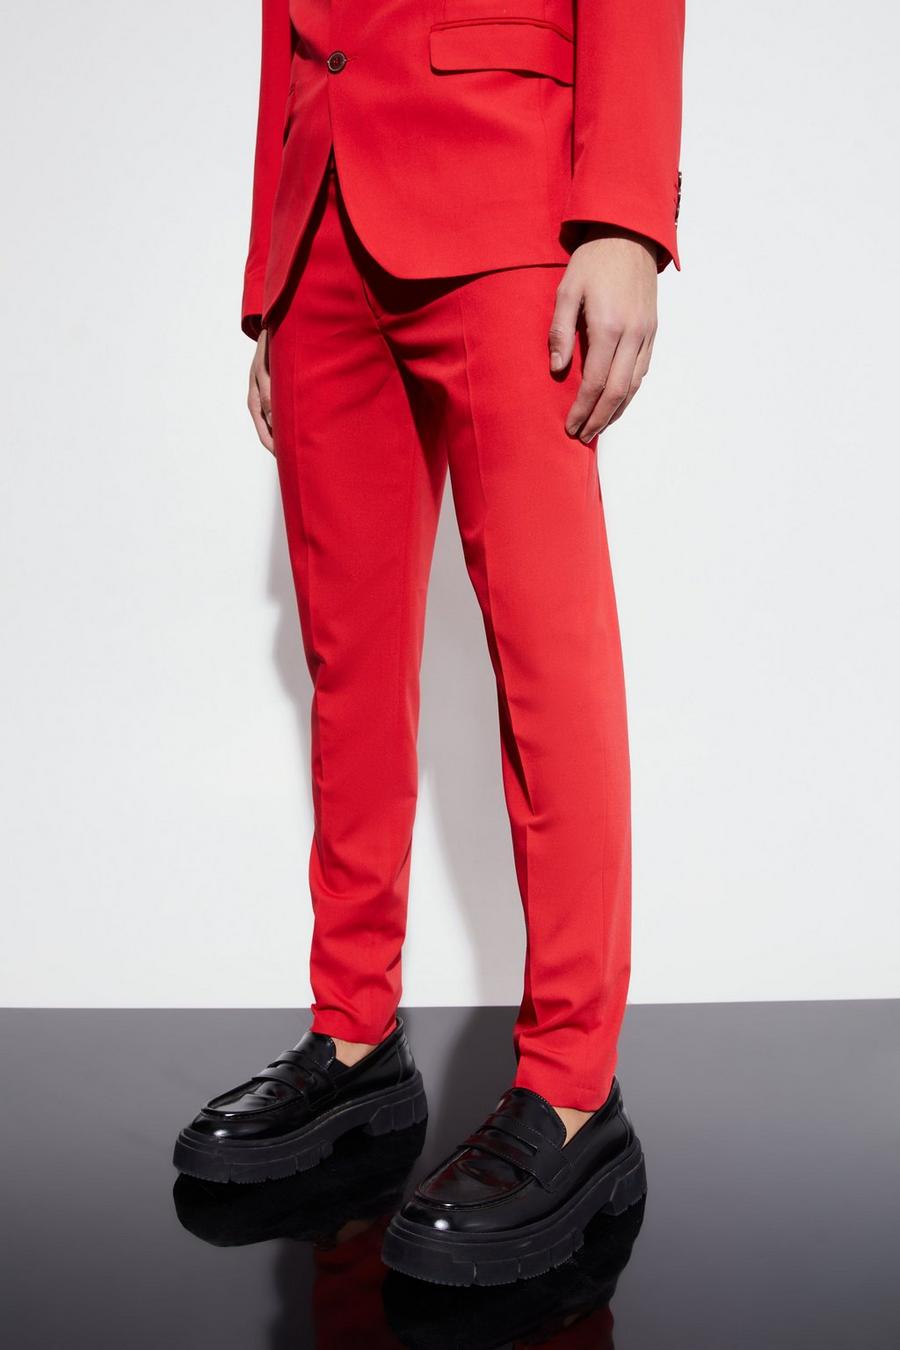 Pantaloni completo Super Skinny Fit, Red rosso